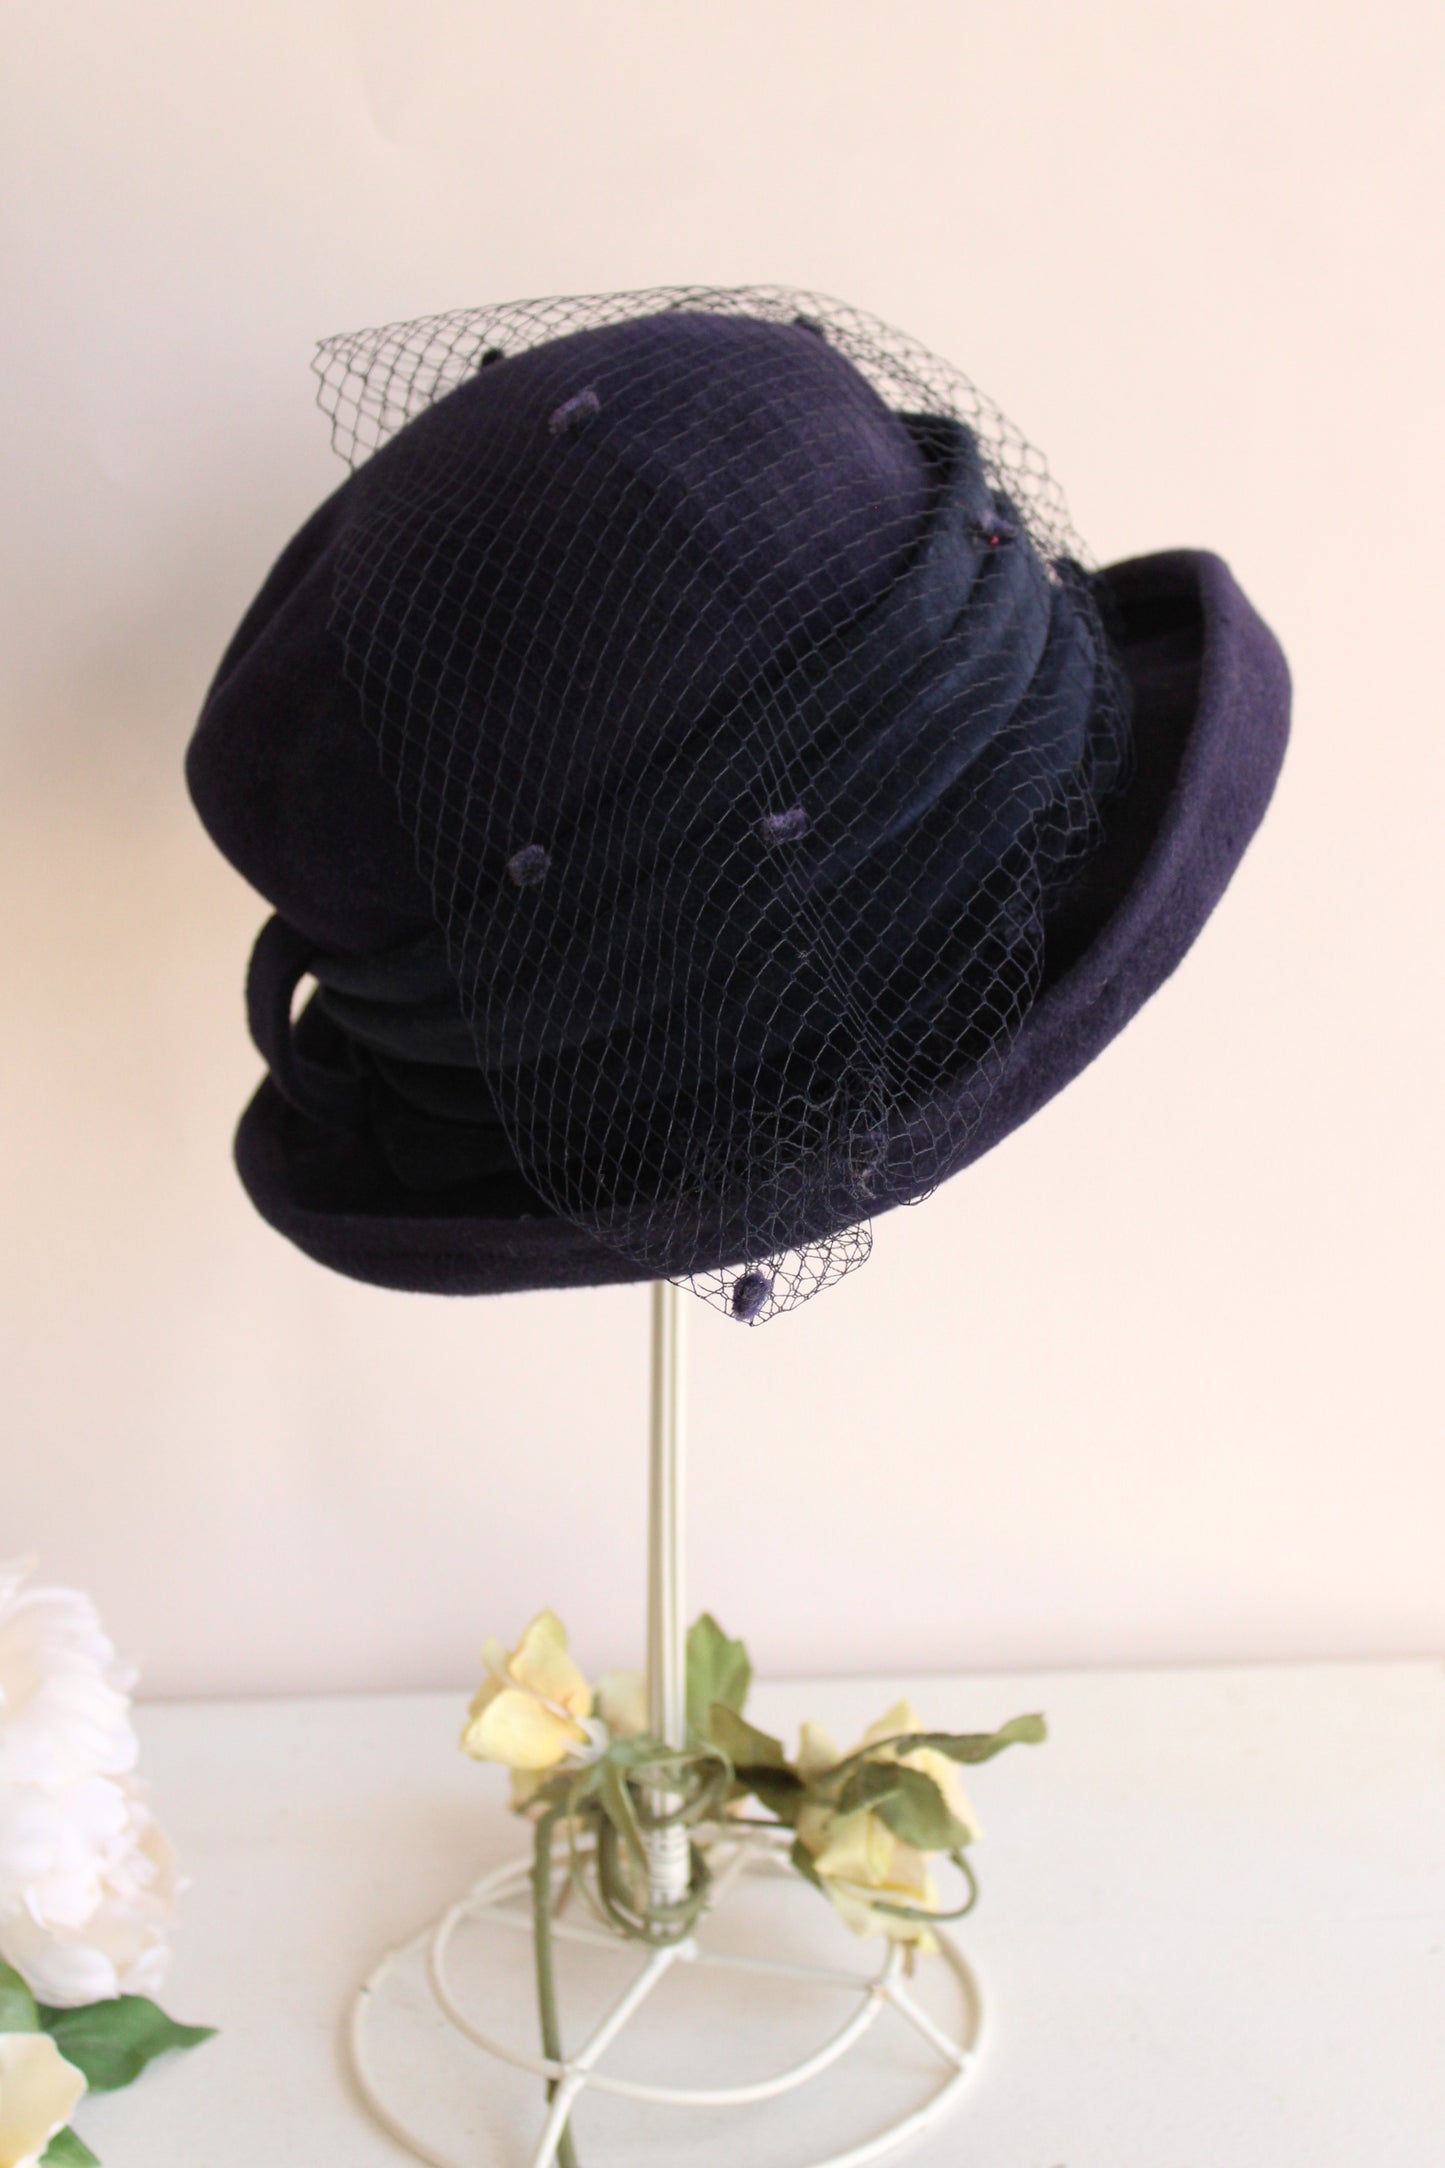 Vintage 1970s Blue Hat With Birdcage Veil by Bermona